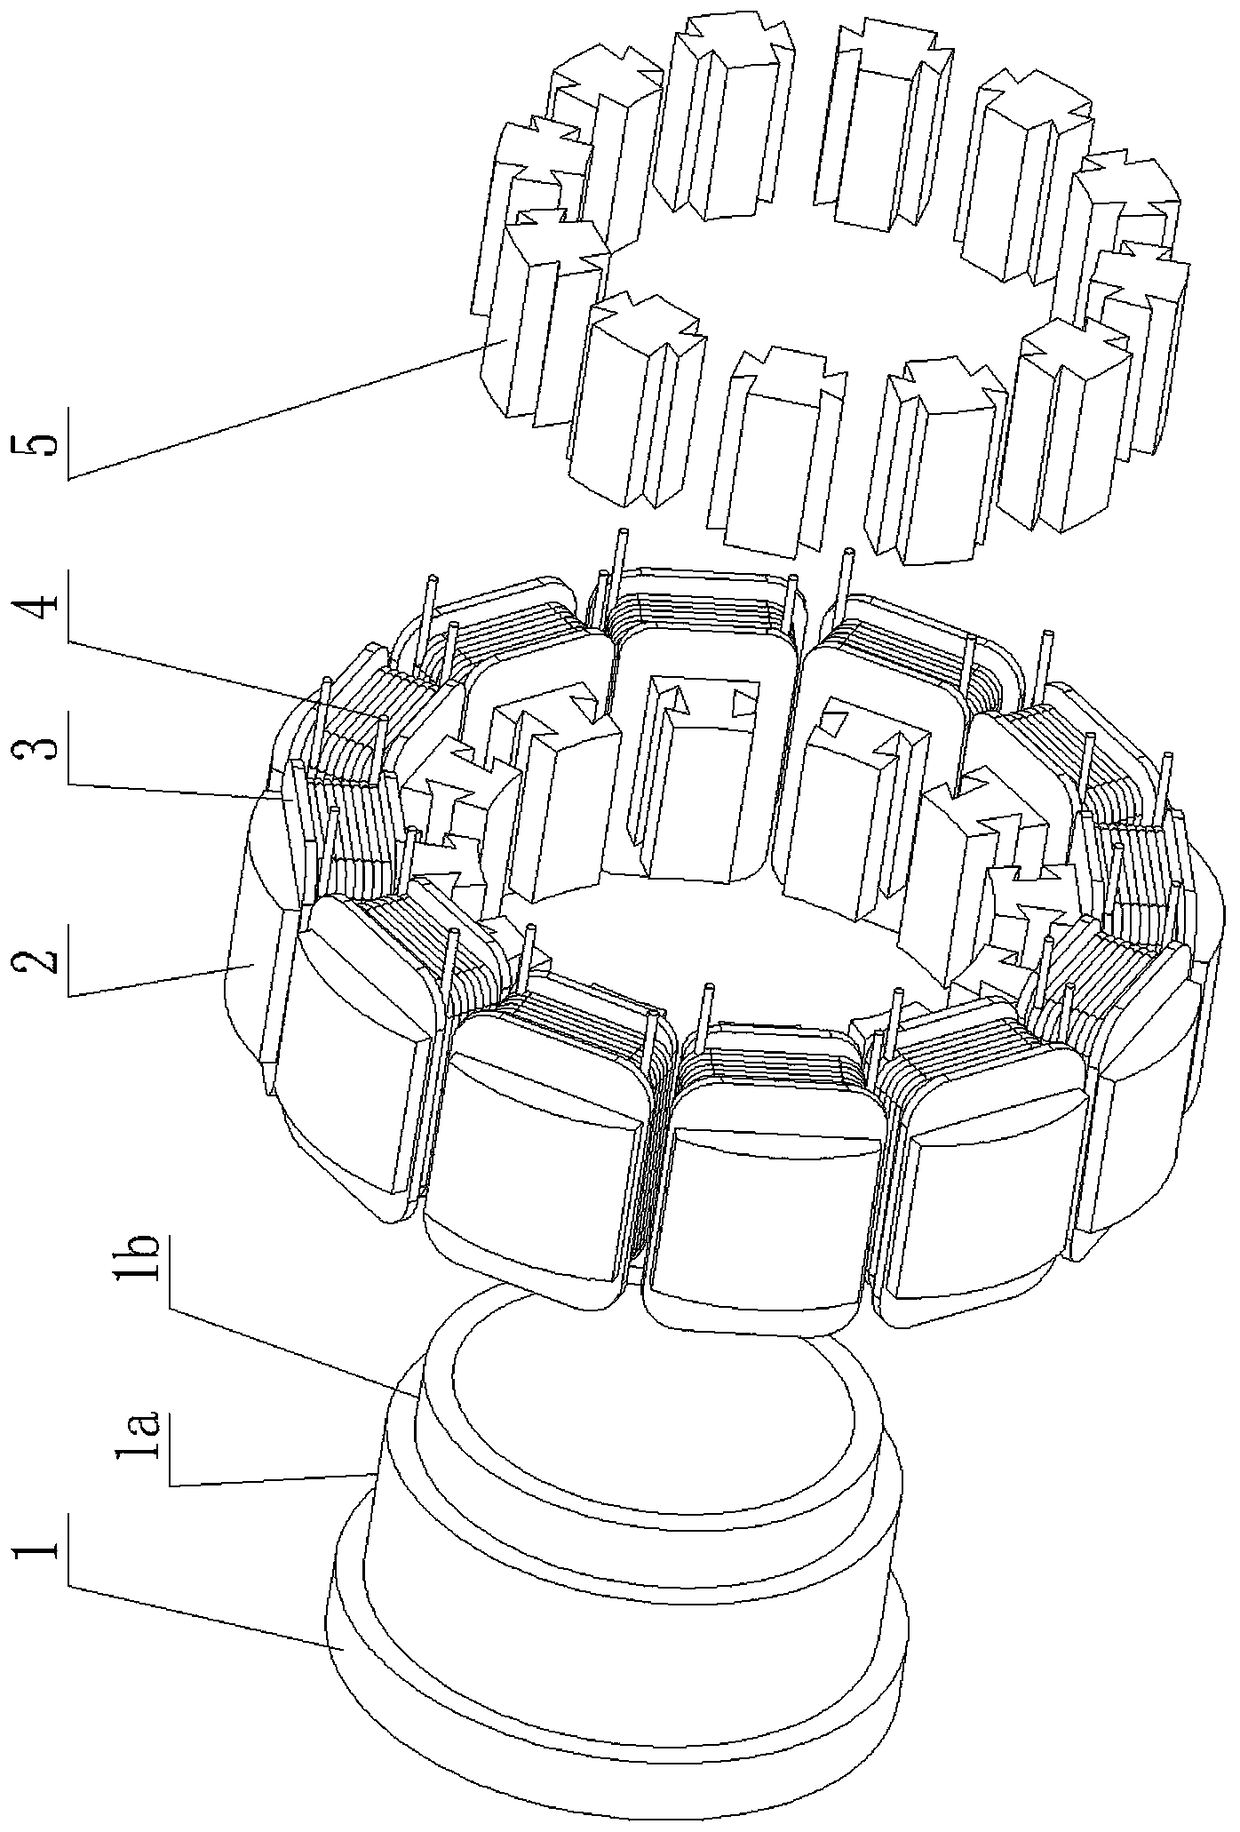 Combined stator with insulating skeleton